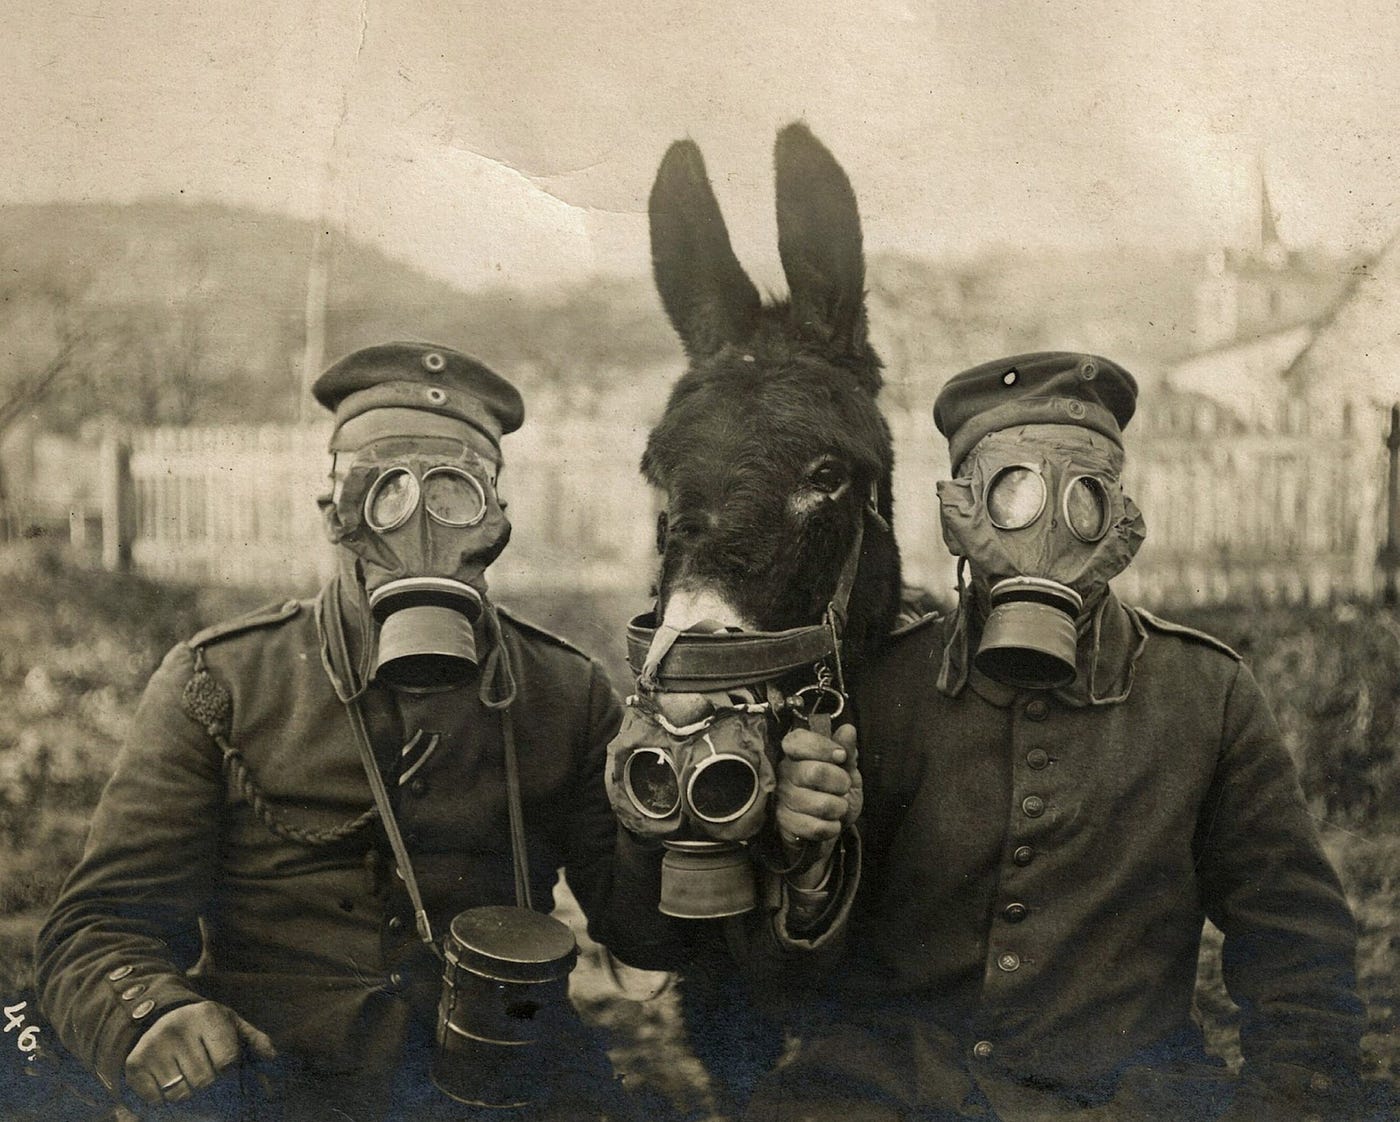 These harrowing photos of children and troops in gas masks show the terror  of WWI | by Rian Dundon | Timeline